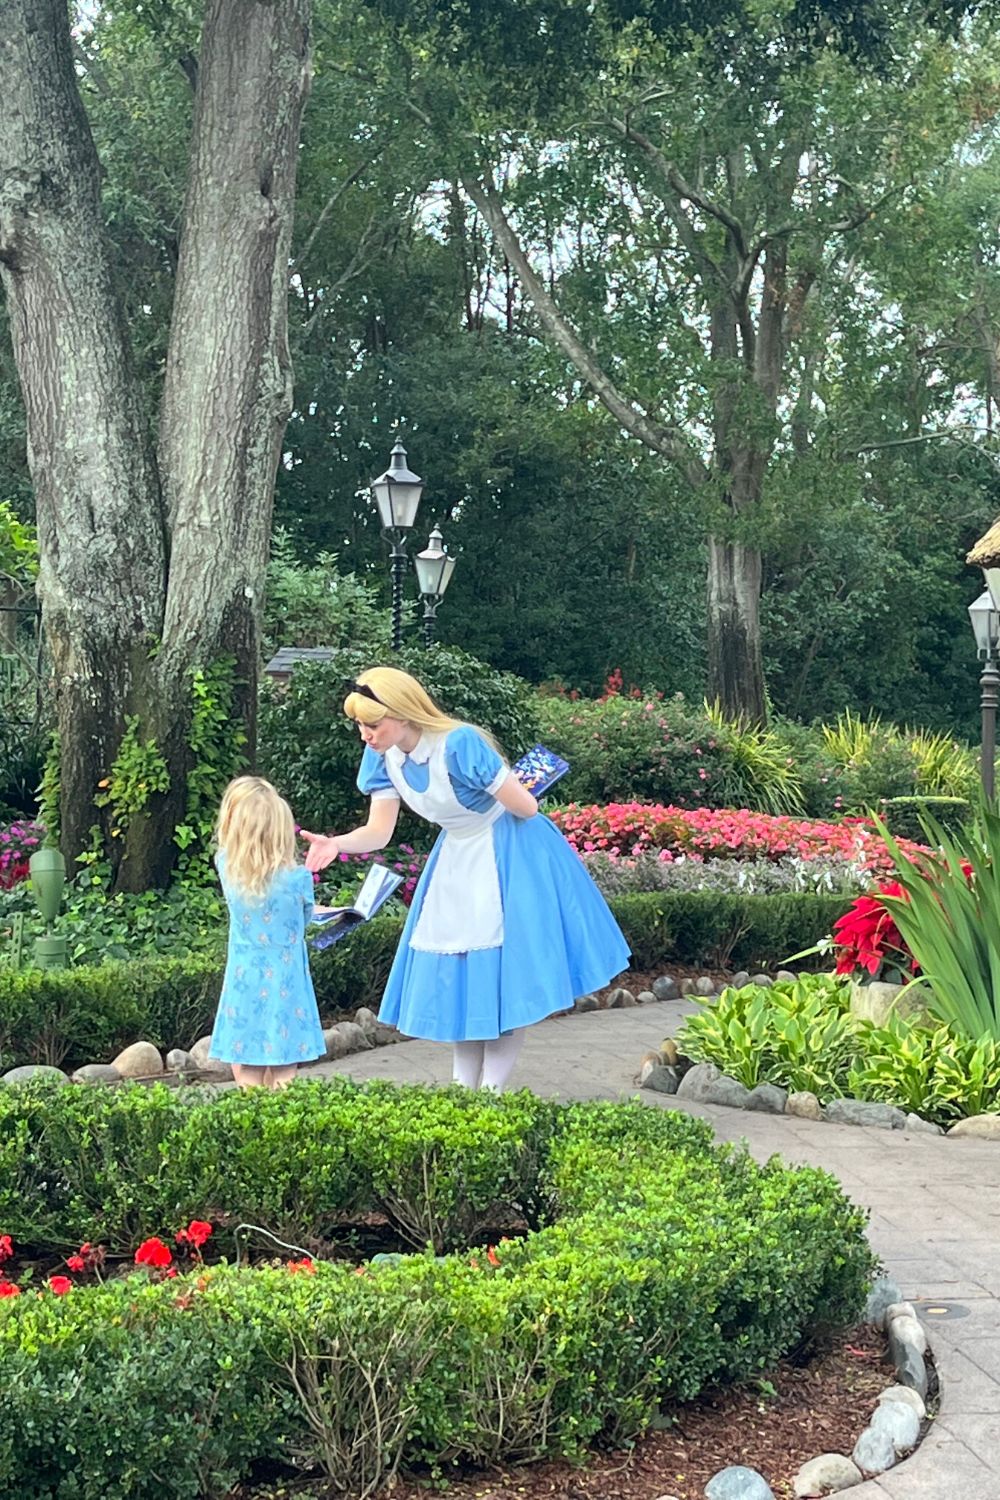 Alice in Wonderland greets a child at a character meet and greet in Disney's Epcot